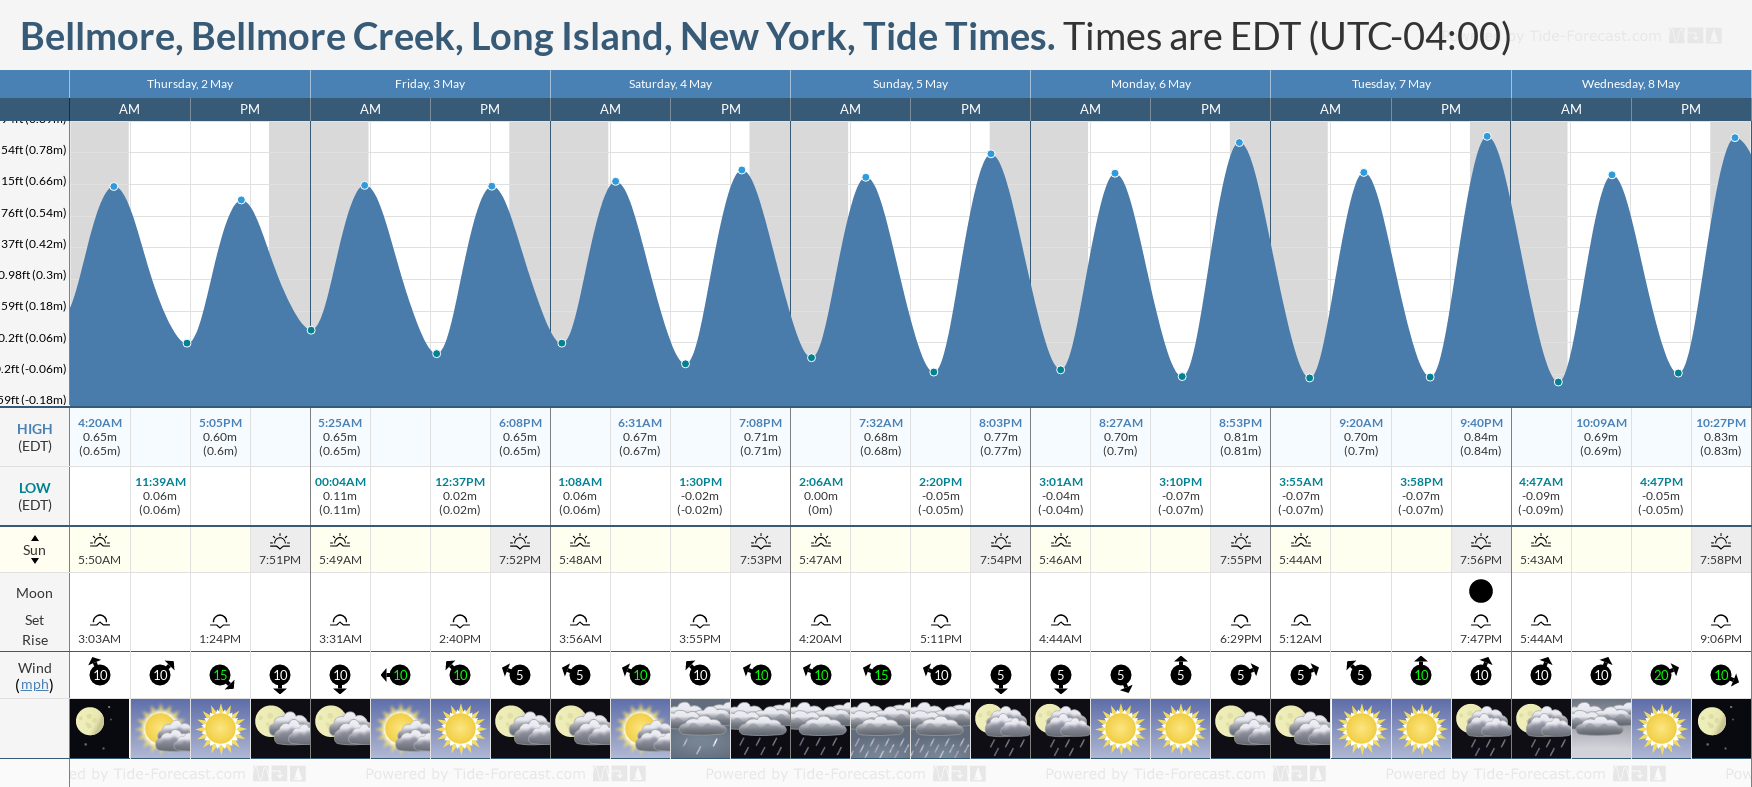 Bellmore, Bellmore Creek, Long Island, New York Tide Chart including high and low tide tide times for the next 7 days